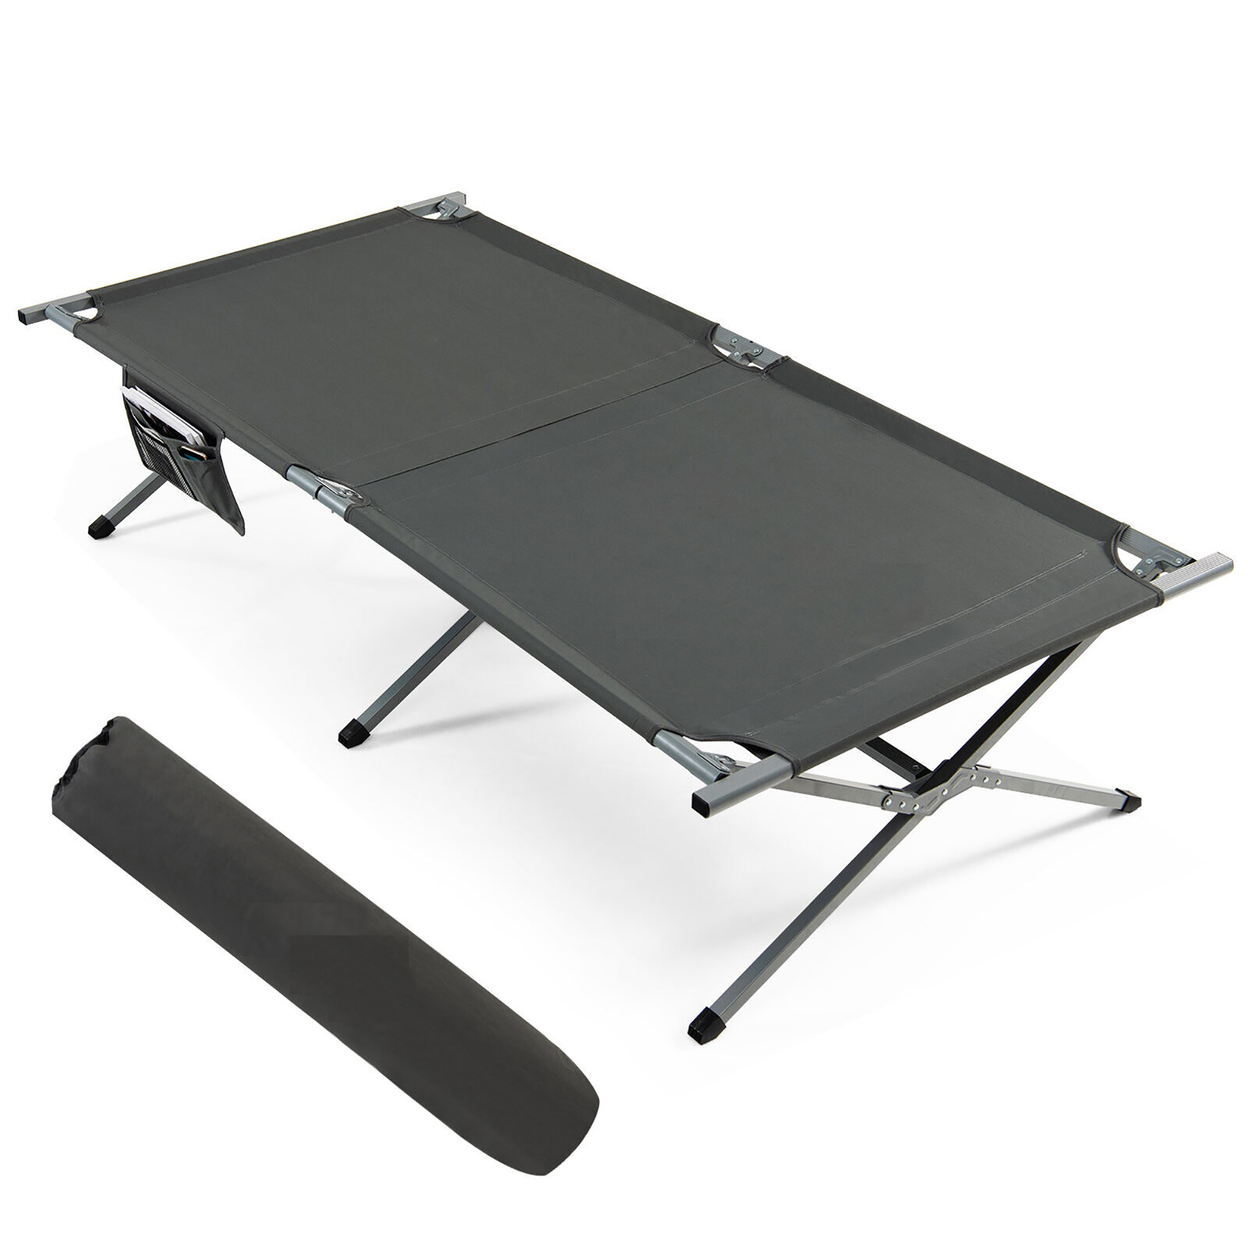 Folding Camping Bed Extra Wide Military Cot Up To 330Lbs W/ Carry Bag & Storage